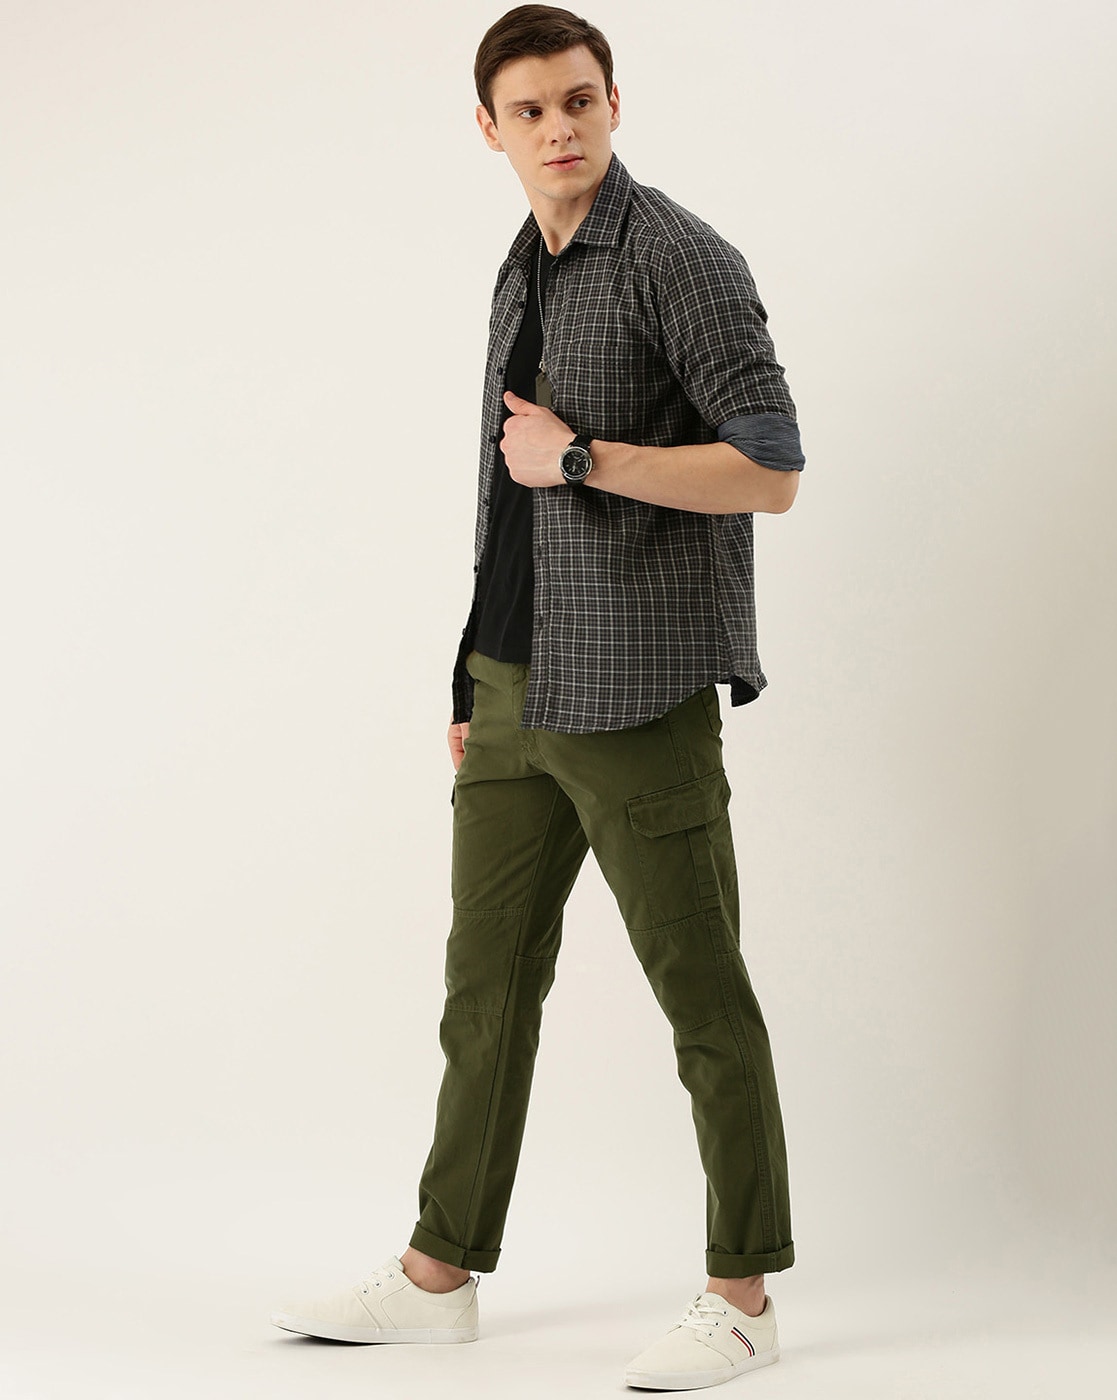 What Color Pants Go With A Green Shirt? (With Pics) • Ready Sleek